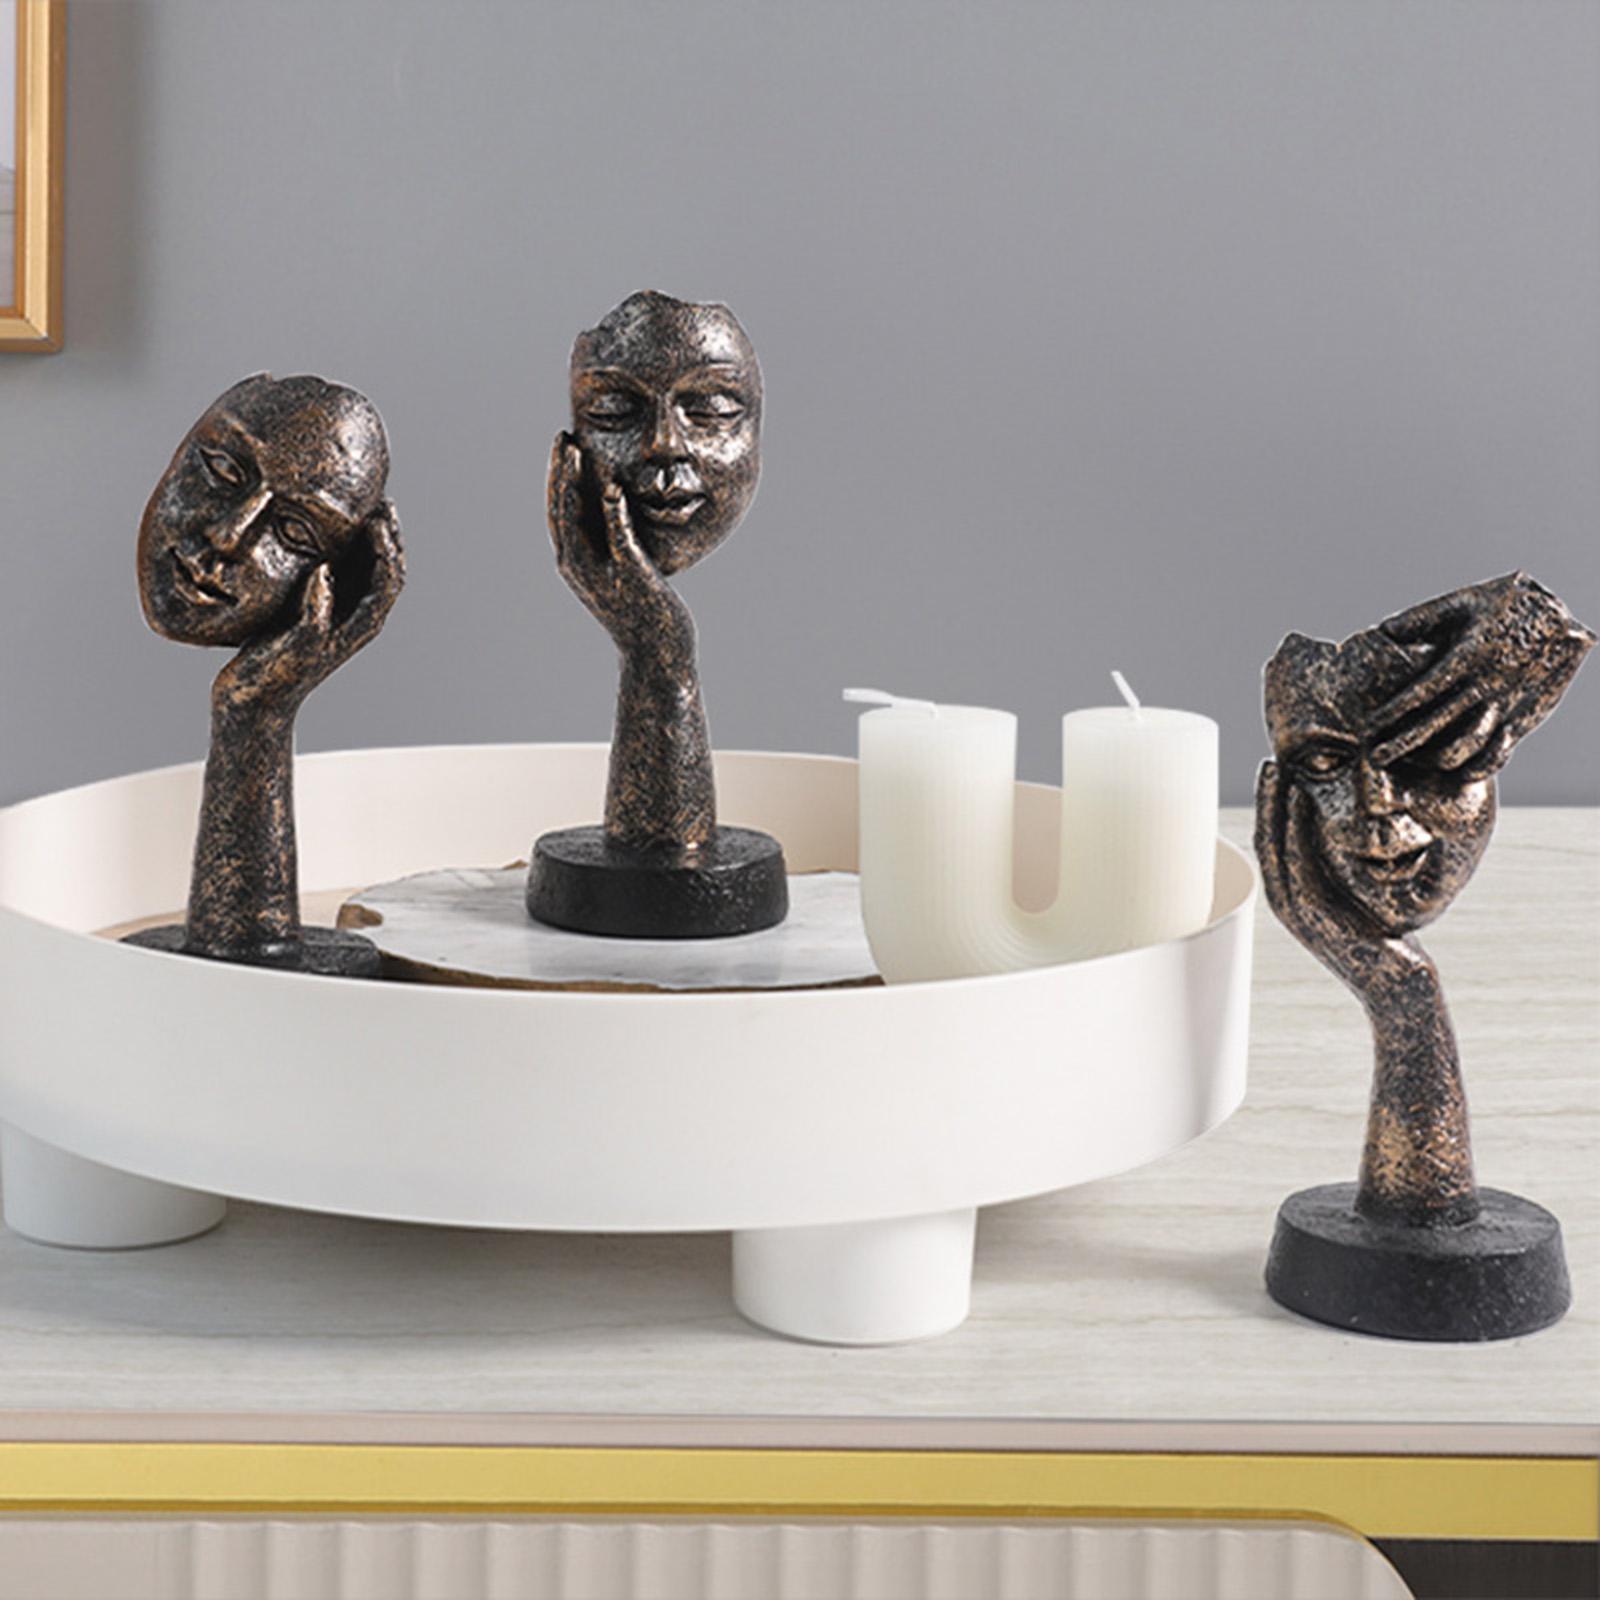 Thinker Statues Face Sculpture for Table Bookshelf Decorative Objects Office 15cmx6.5cm